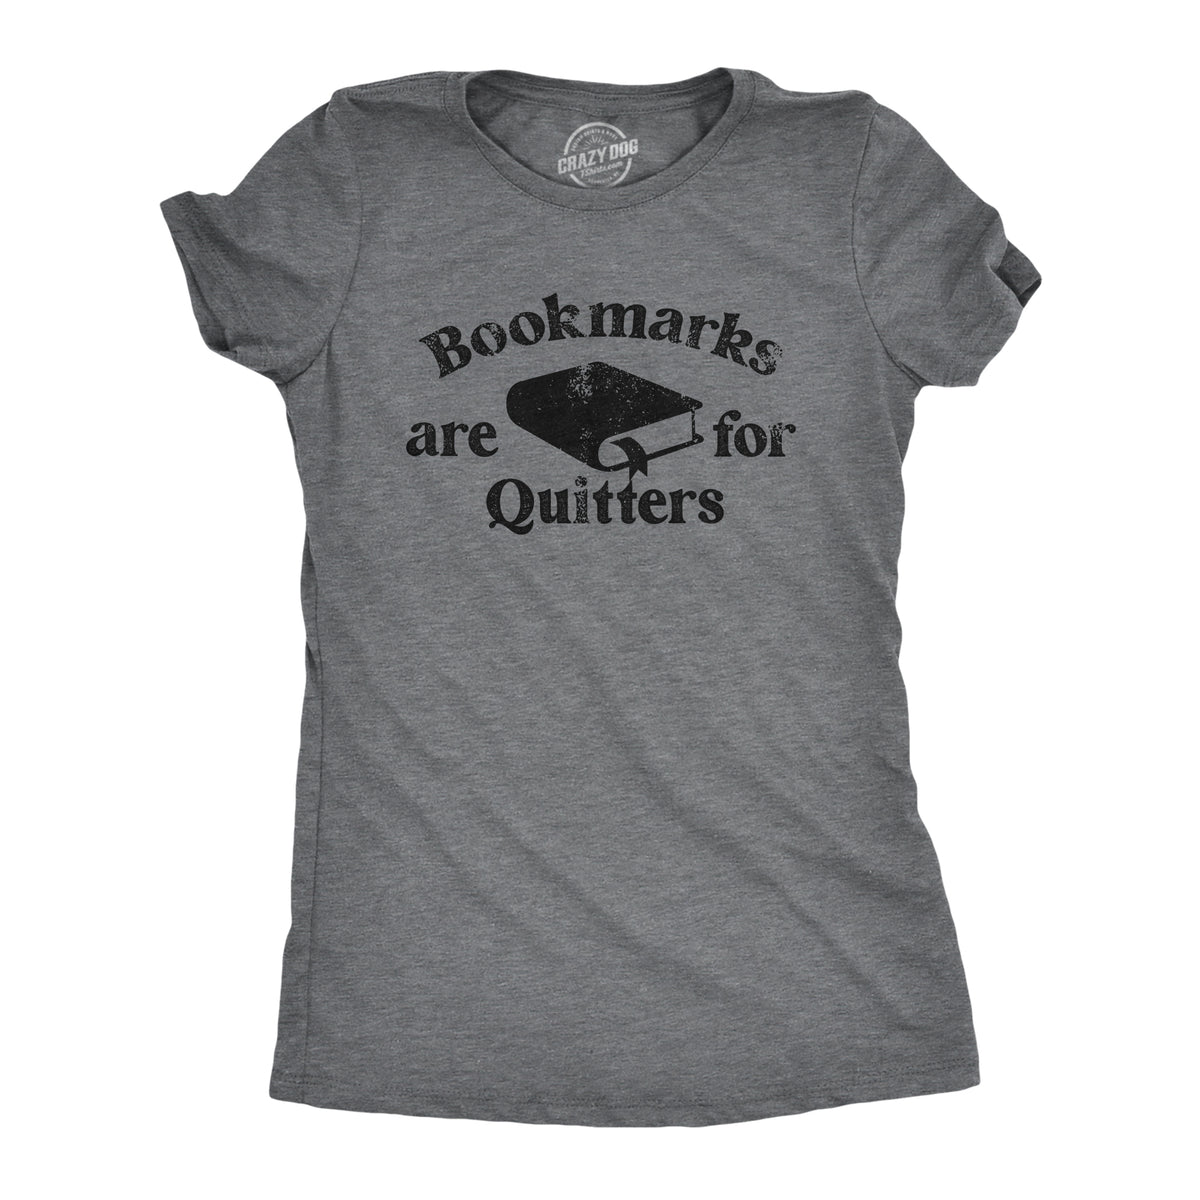 Funny Dark Heather Grey - QUITTERS Bookmarks Are For Quitters Womens T Shirt Nerdy Nerdy sarcastic Tee